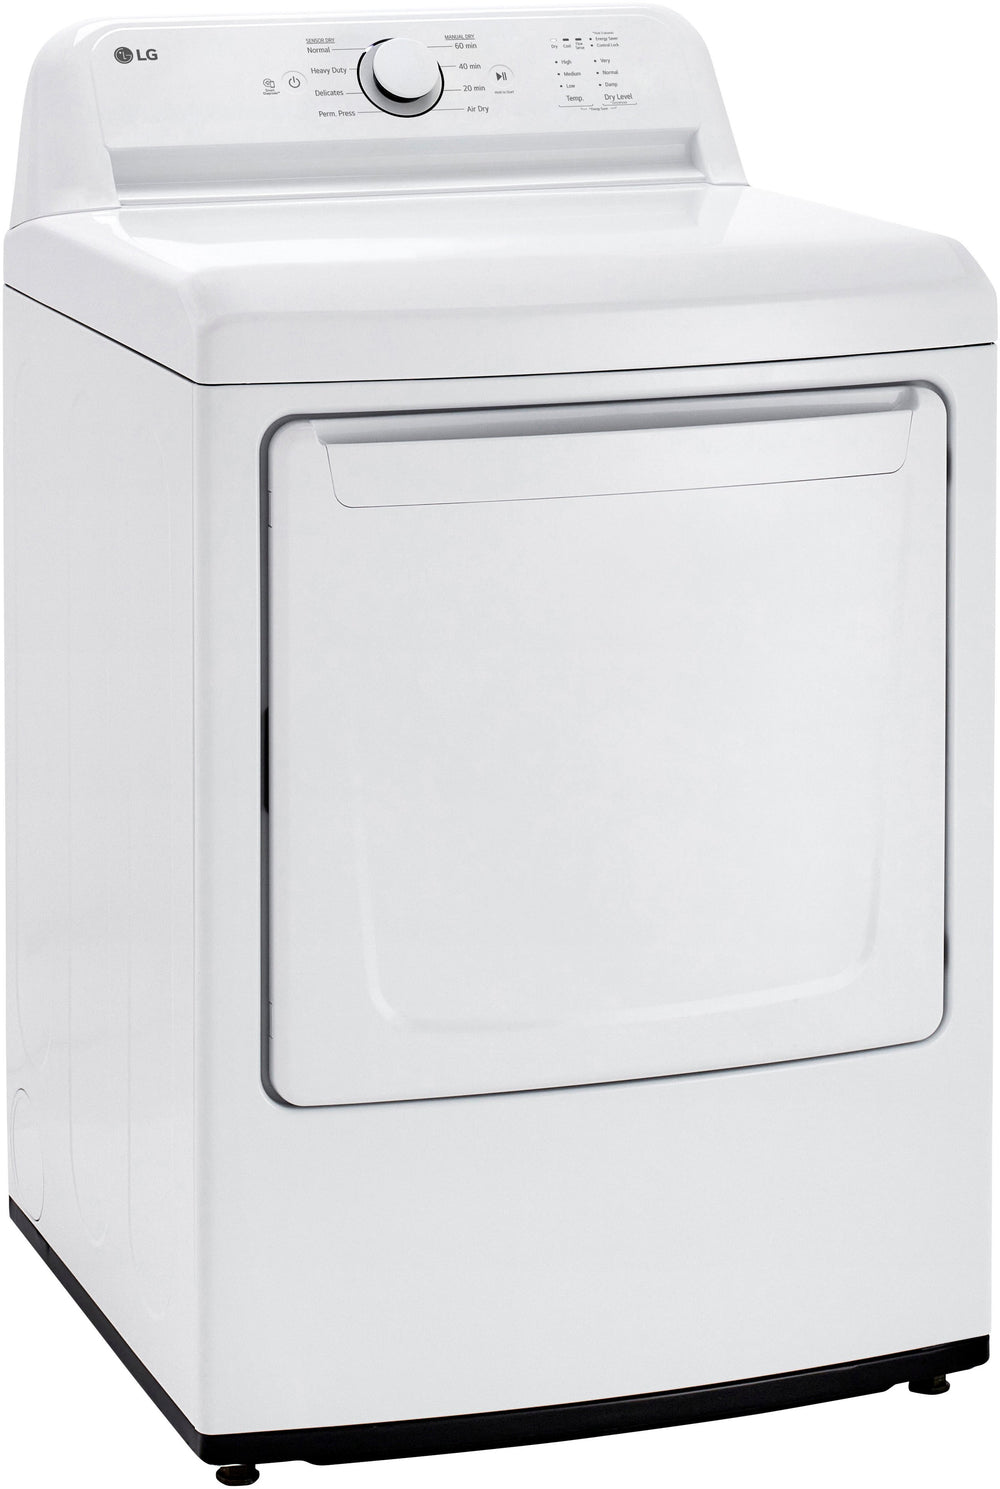 LG - 7.3 Cu. Ft. Smart Electric Dryer with Sensor Dry - White_1